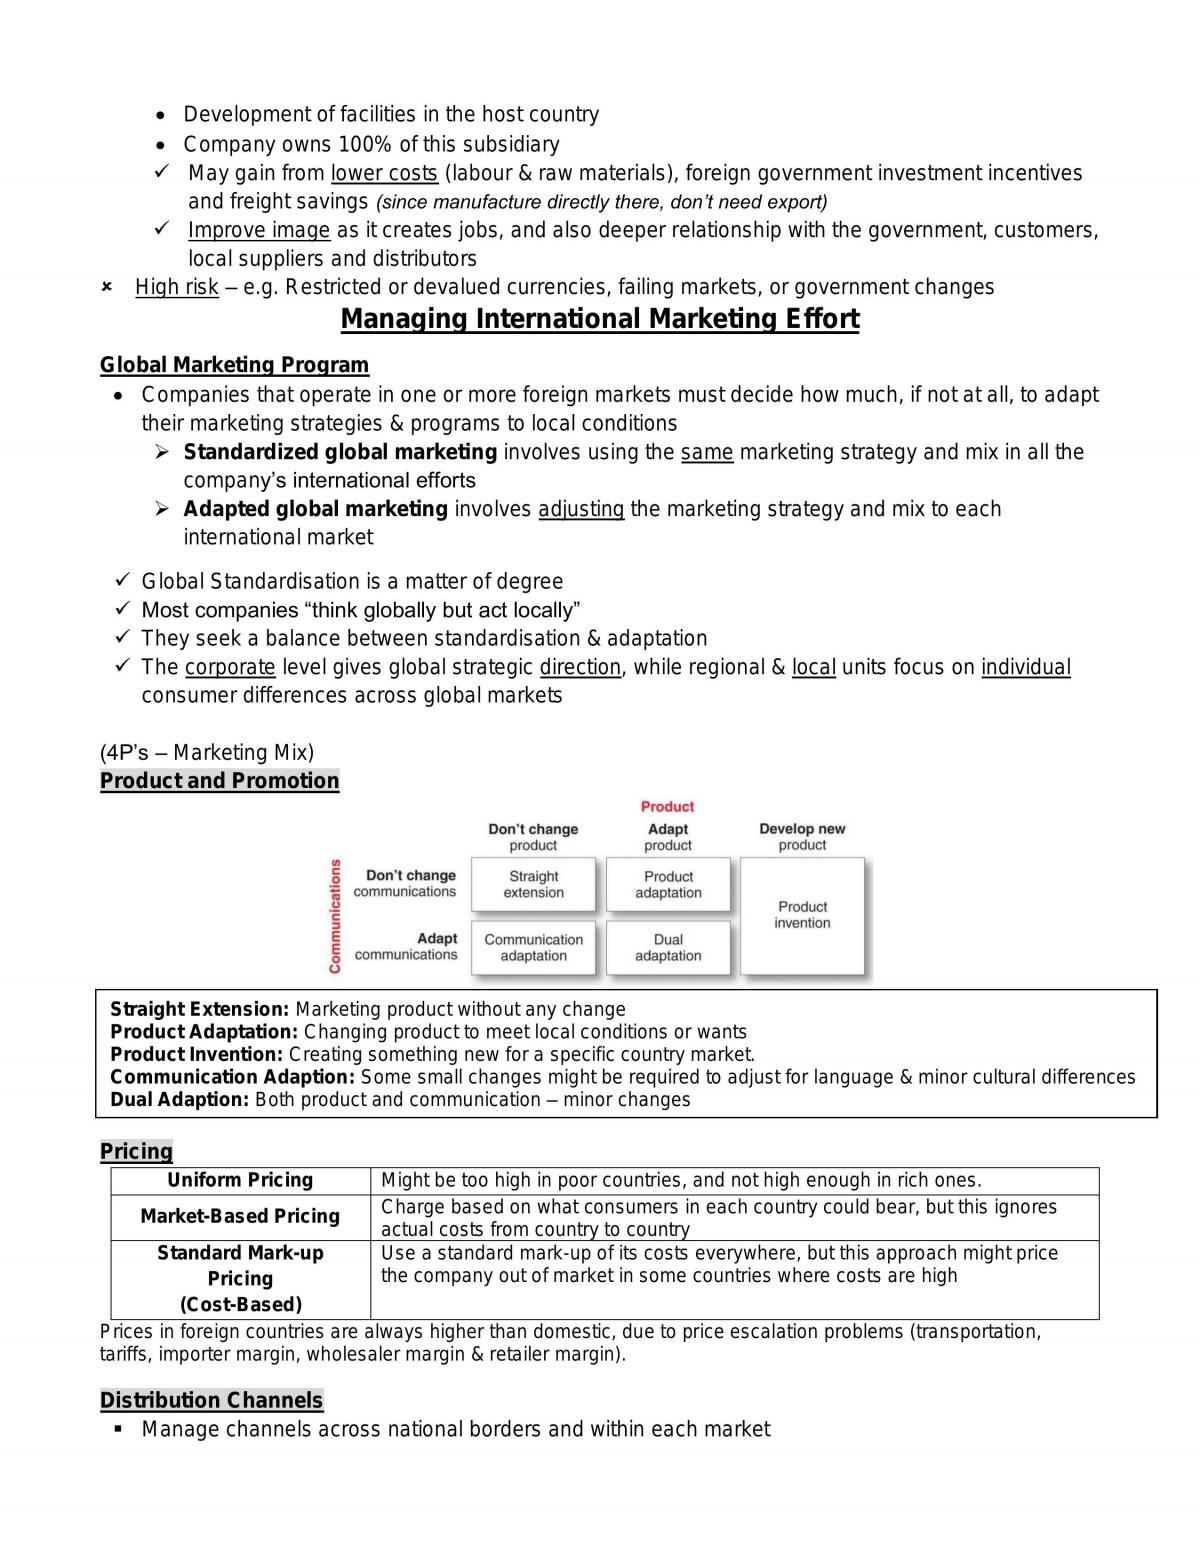 AB1501 - Marketing (Complete Guide) - Page 60